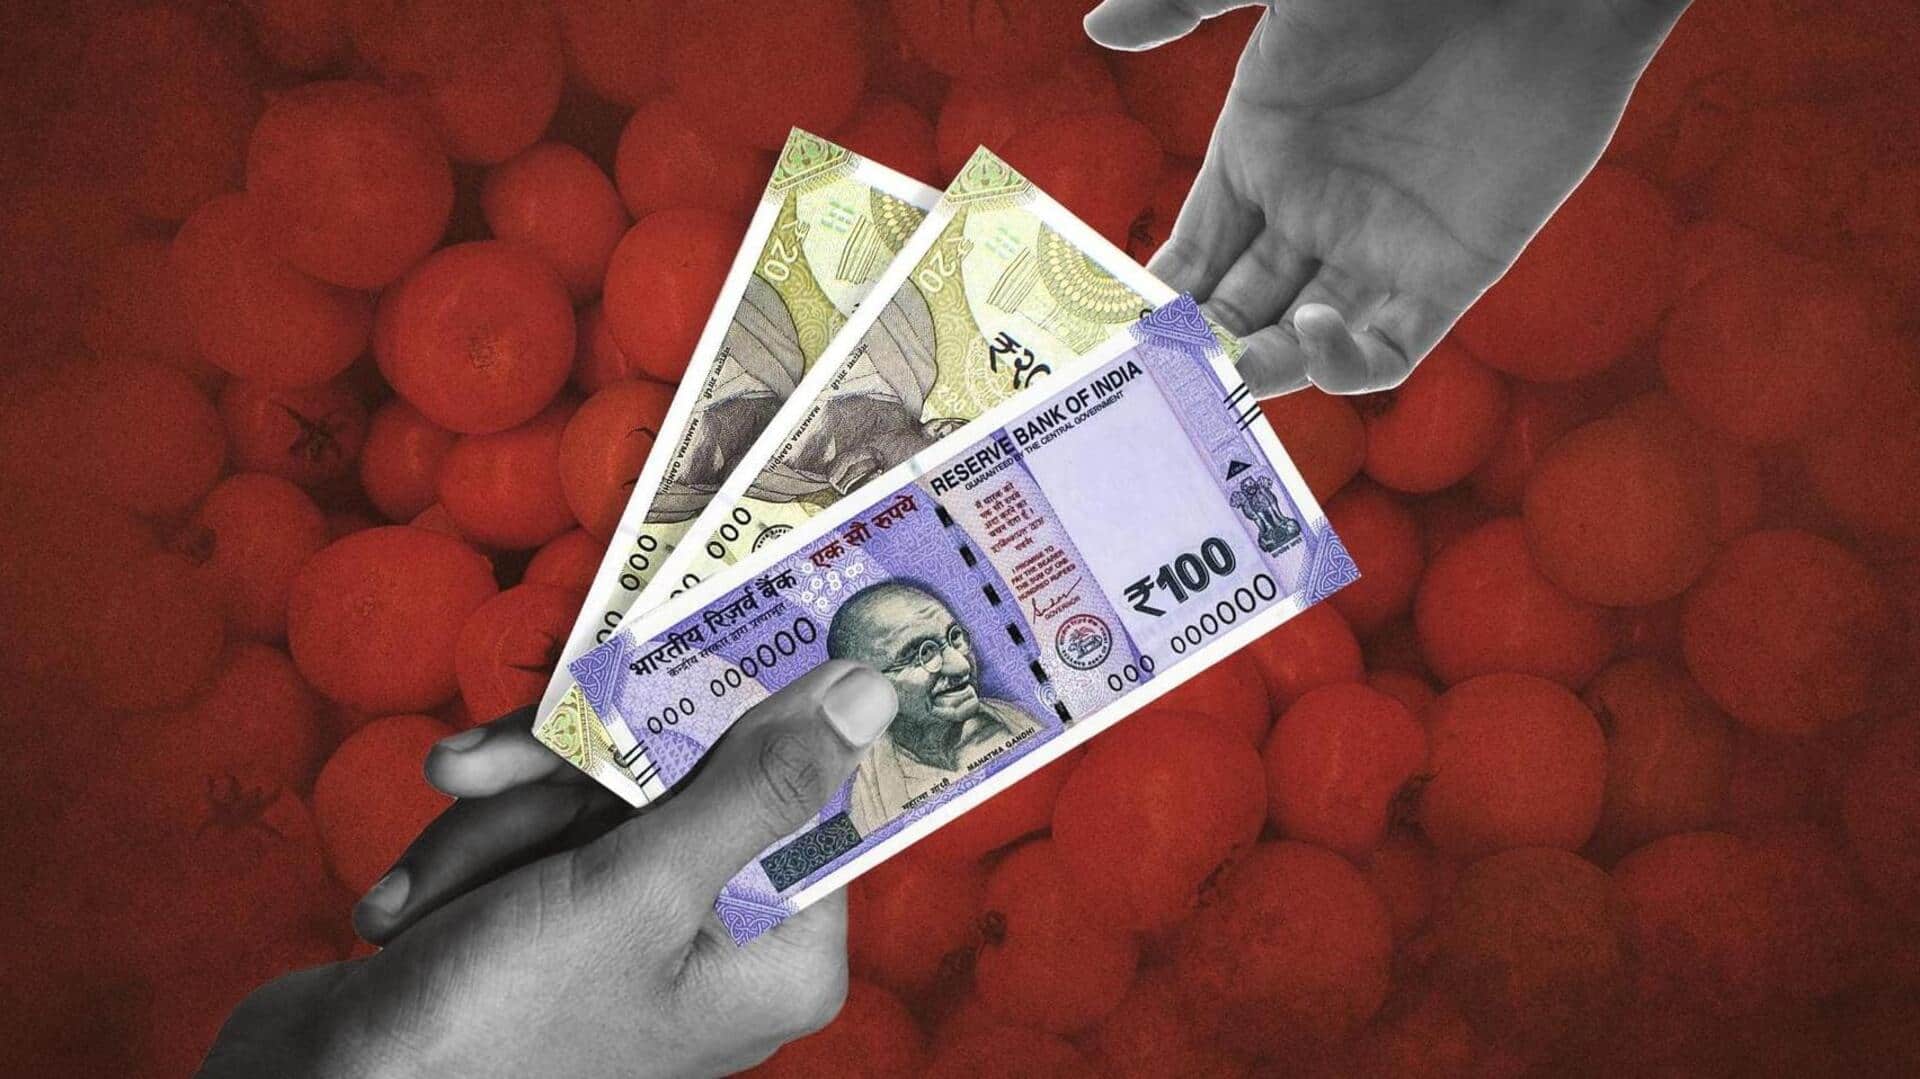 At 7.44%, India's retail inflation reaches 15-month high